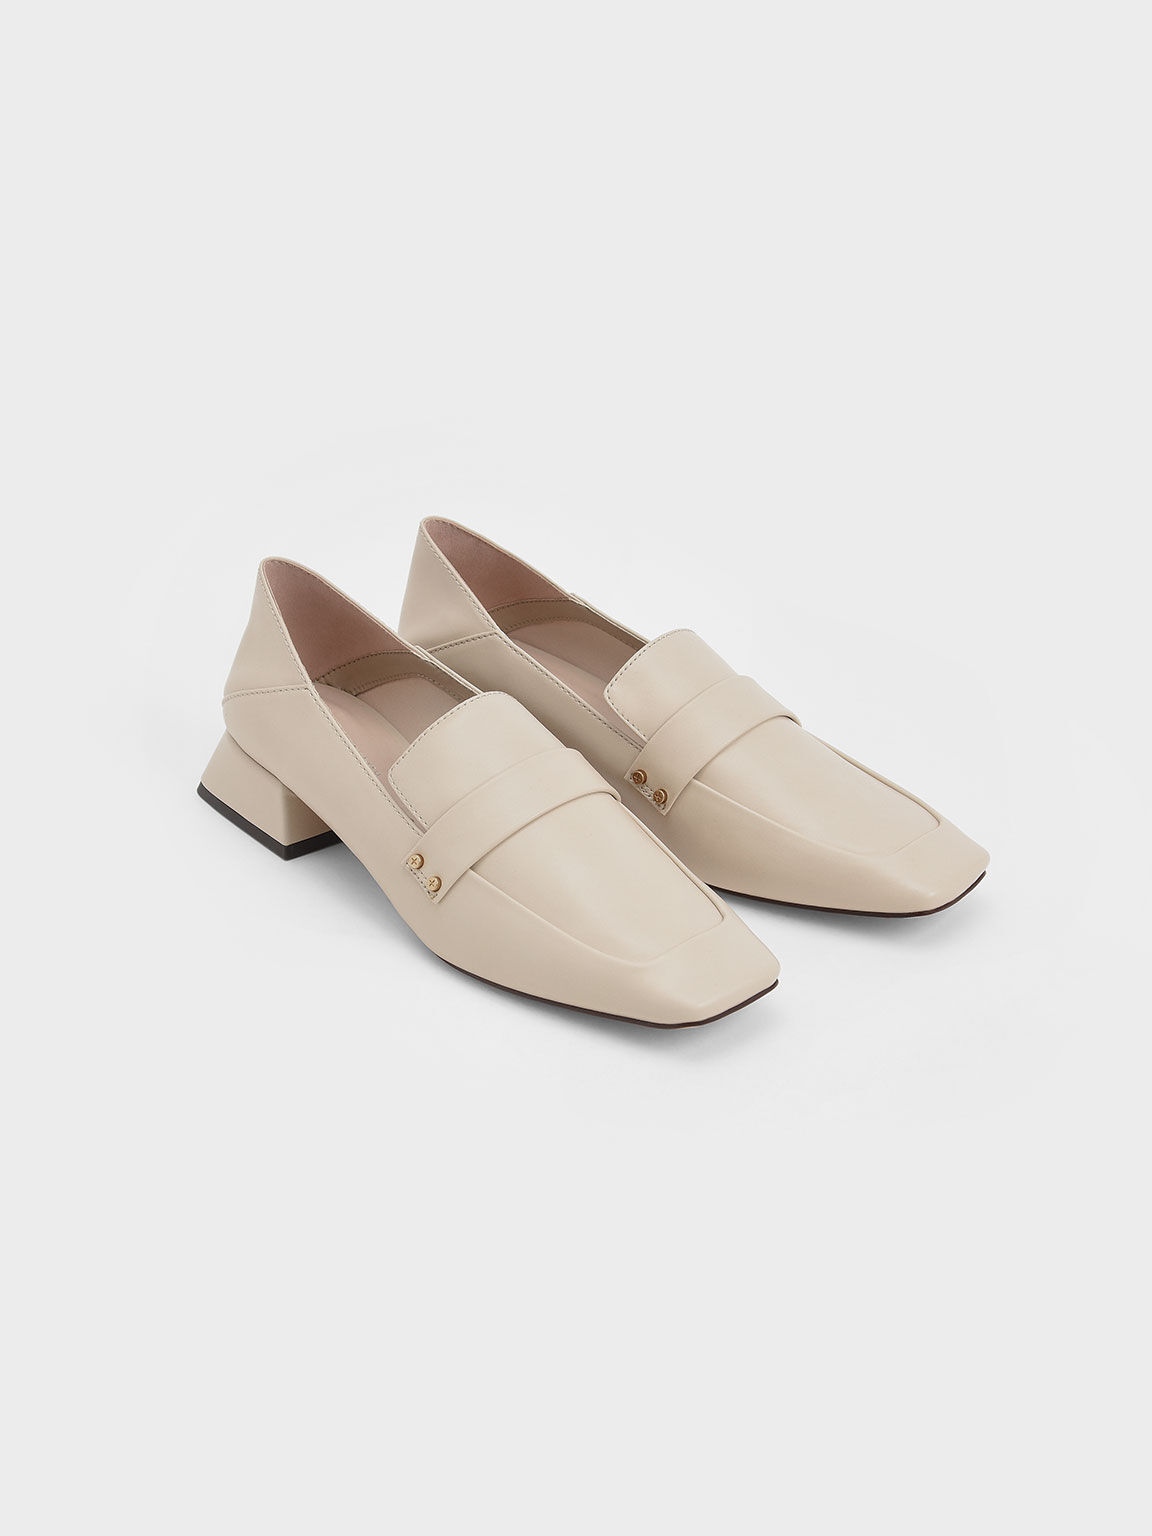 Square Toe Step-Back Penny Loafers, Cream, hi-res